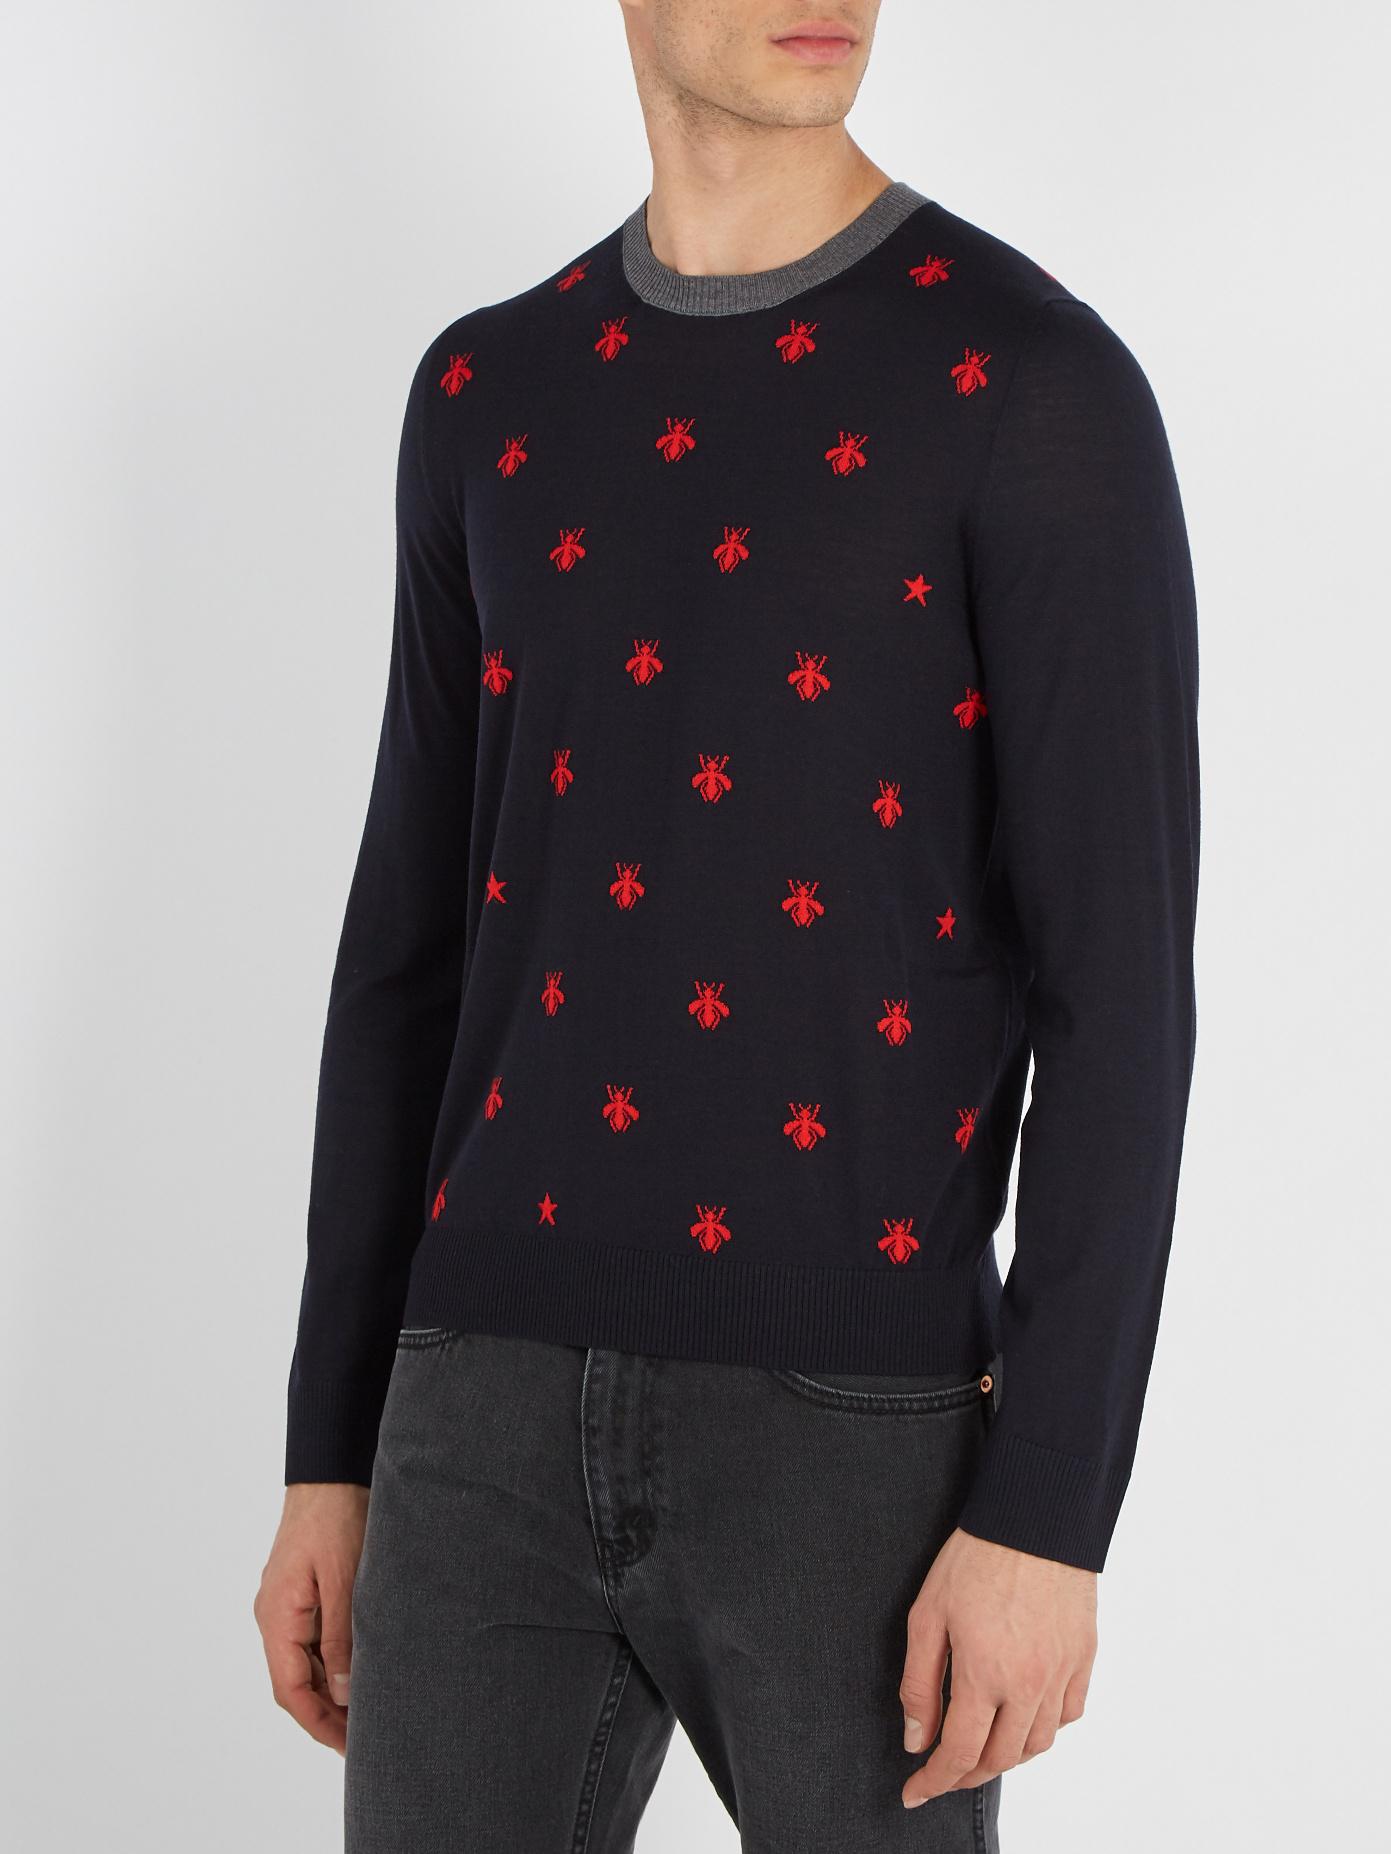 Gucci Bee-embroidered Wool Sweater in Navy (Blue) for Men - Lyst